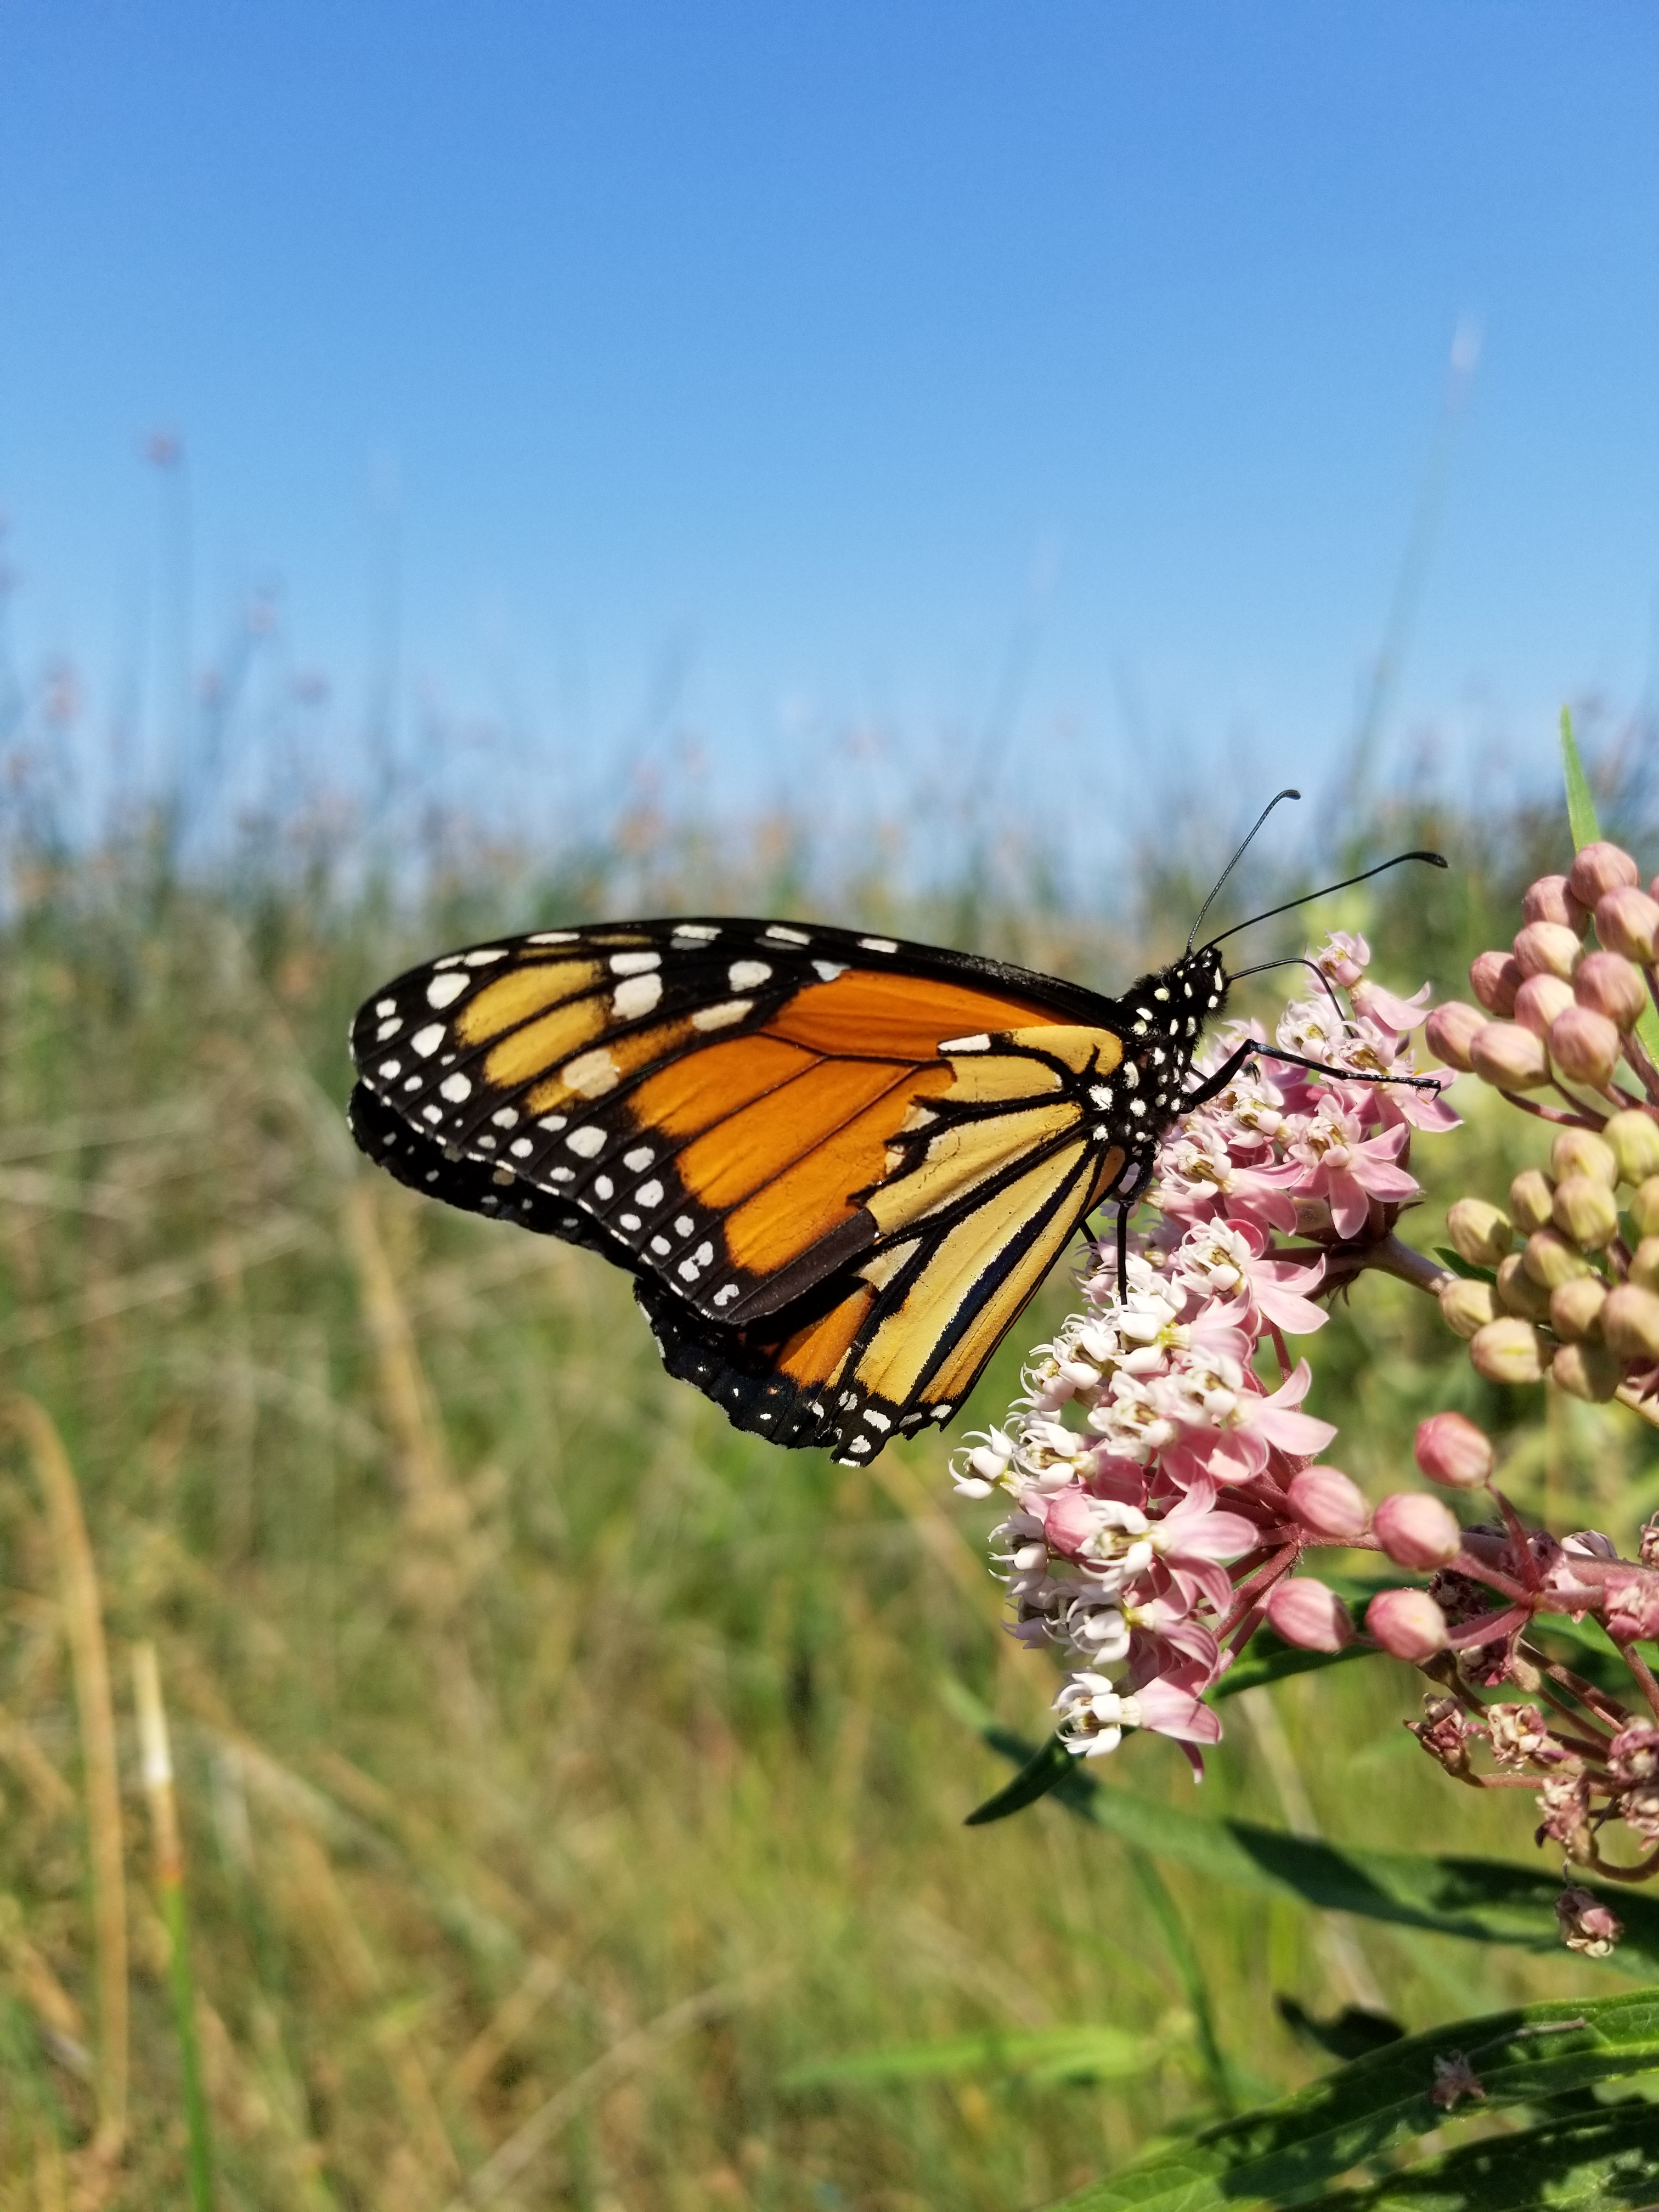 An adult monarch rests on the pink-and-white blooms of a milkweed in a grassy landscape.